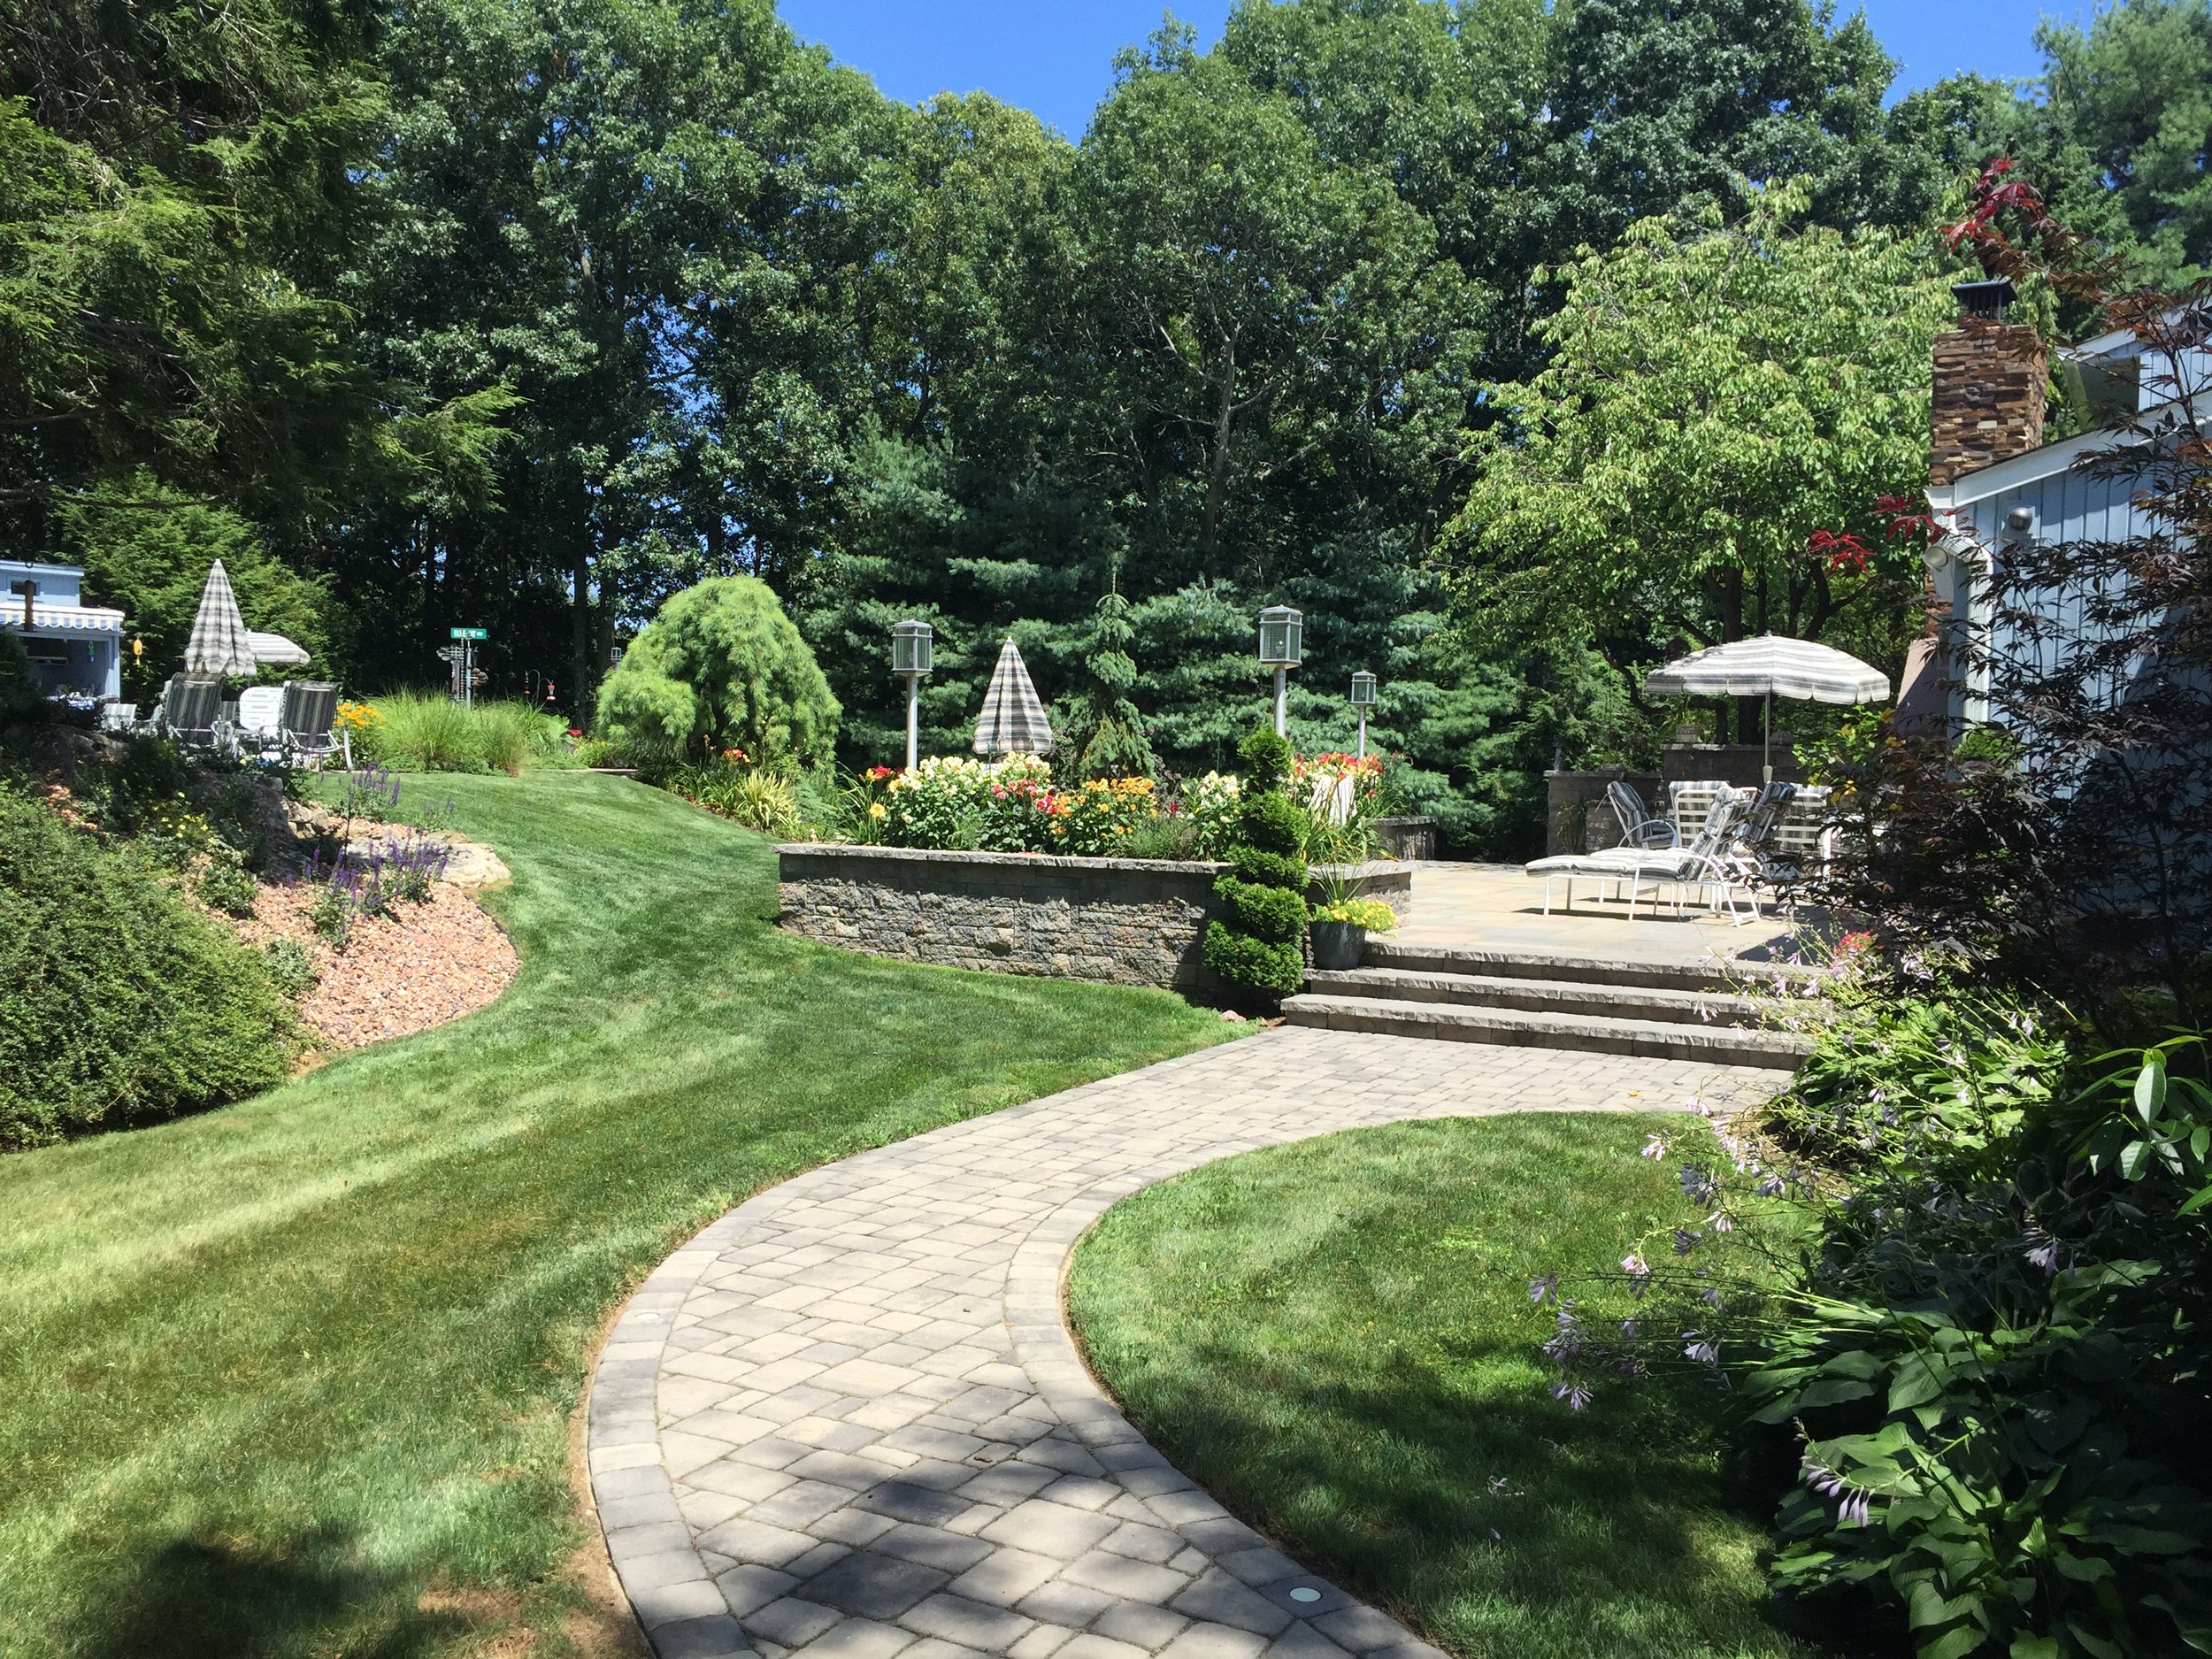 Landscape design with paved walkway in Long Island, NY​​​​​​​